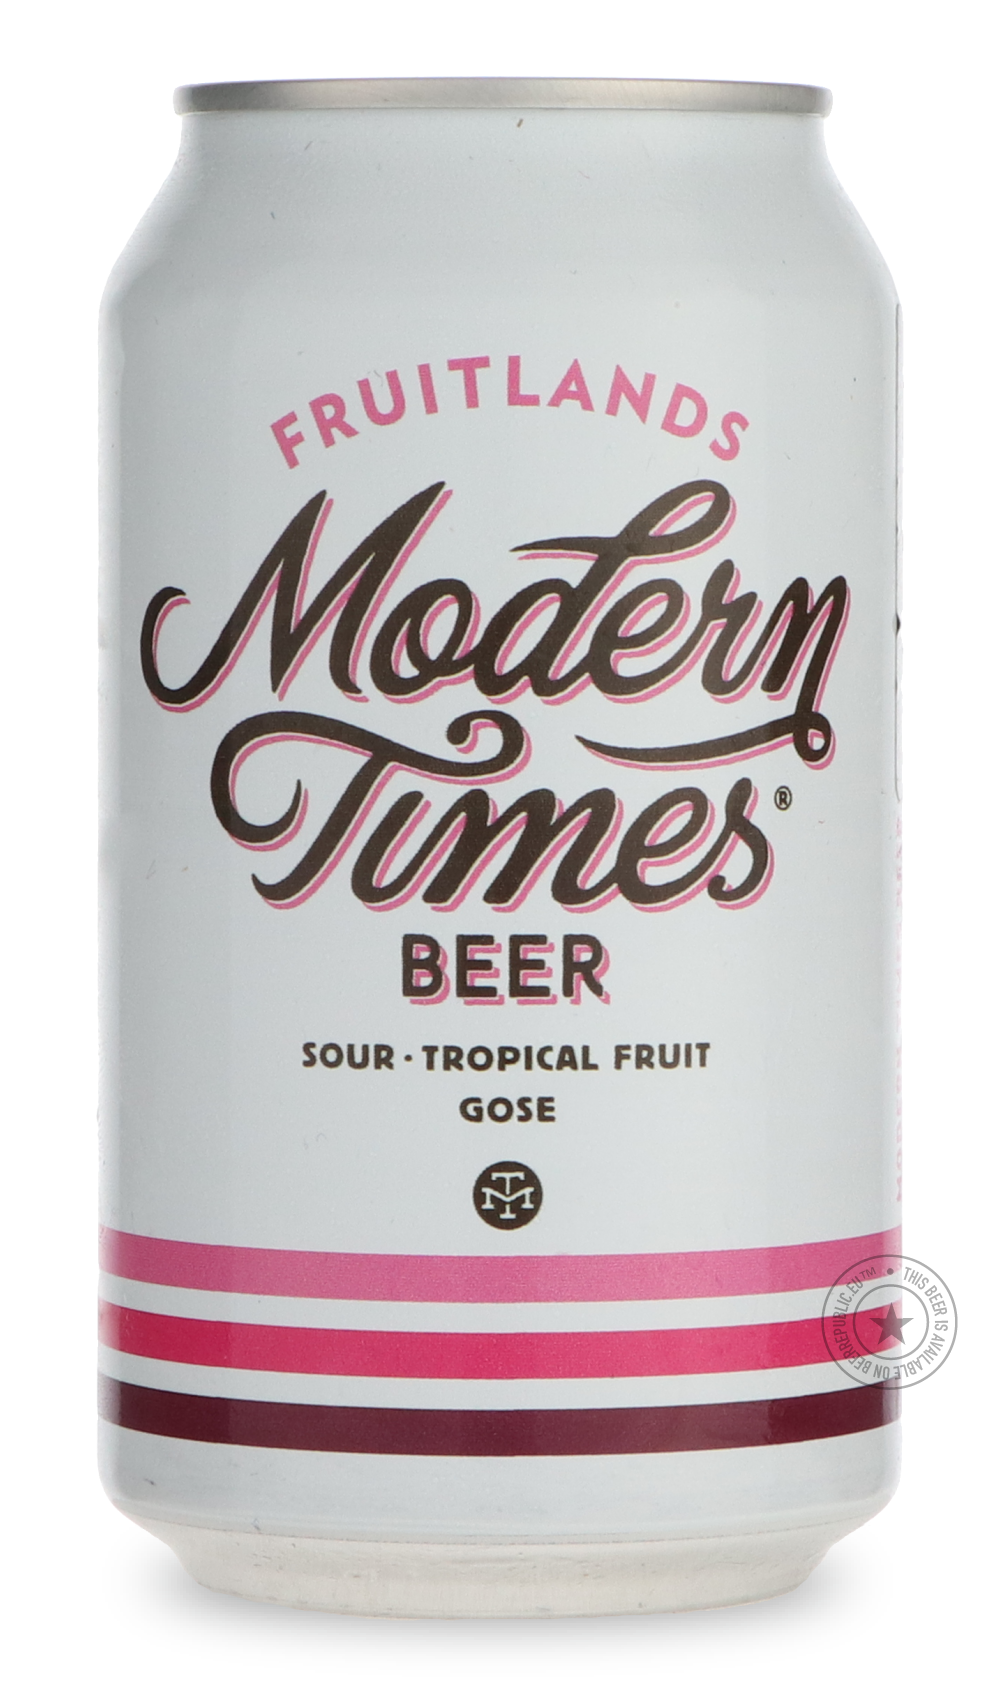 -Modern Times- Fruitlands-Sour / Wild & Fruity- Only @ Beer Republic - The best online beer store for American & Canadian craft beer - Buy beer online from the USA and Canada - Bier online kopen - Amerikaans bier kopen - Craft beer store - Craft beer kopen - Amerikanisch bier kaufen - Bier online kaufen - Acheter biere online - IPA - Stout - Porter - New England IPA - Hazy IPA - Imperial Stout - Barrel Aged - Barrel Aged Imperial Stout - Brown - Dark beer - Blond - Blonde - Pilsner - Lager - Wheat - Weizen 